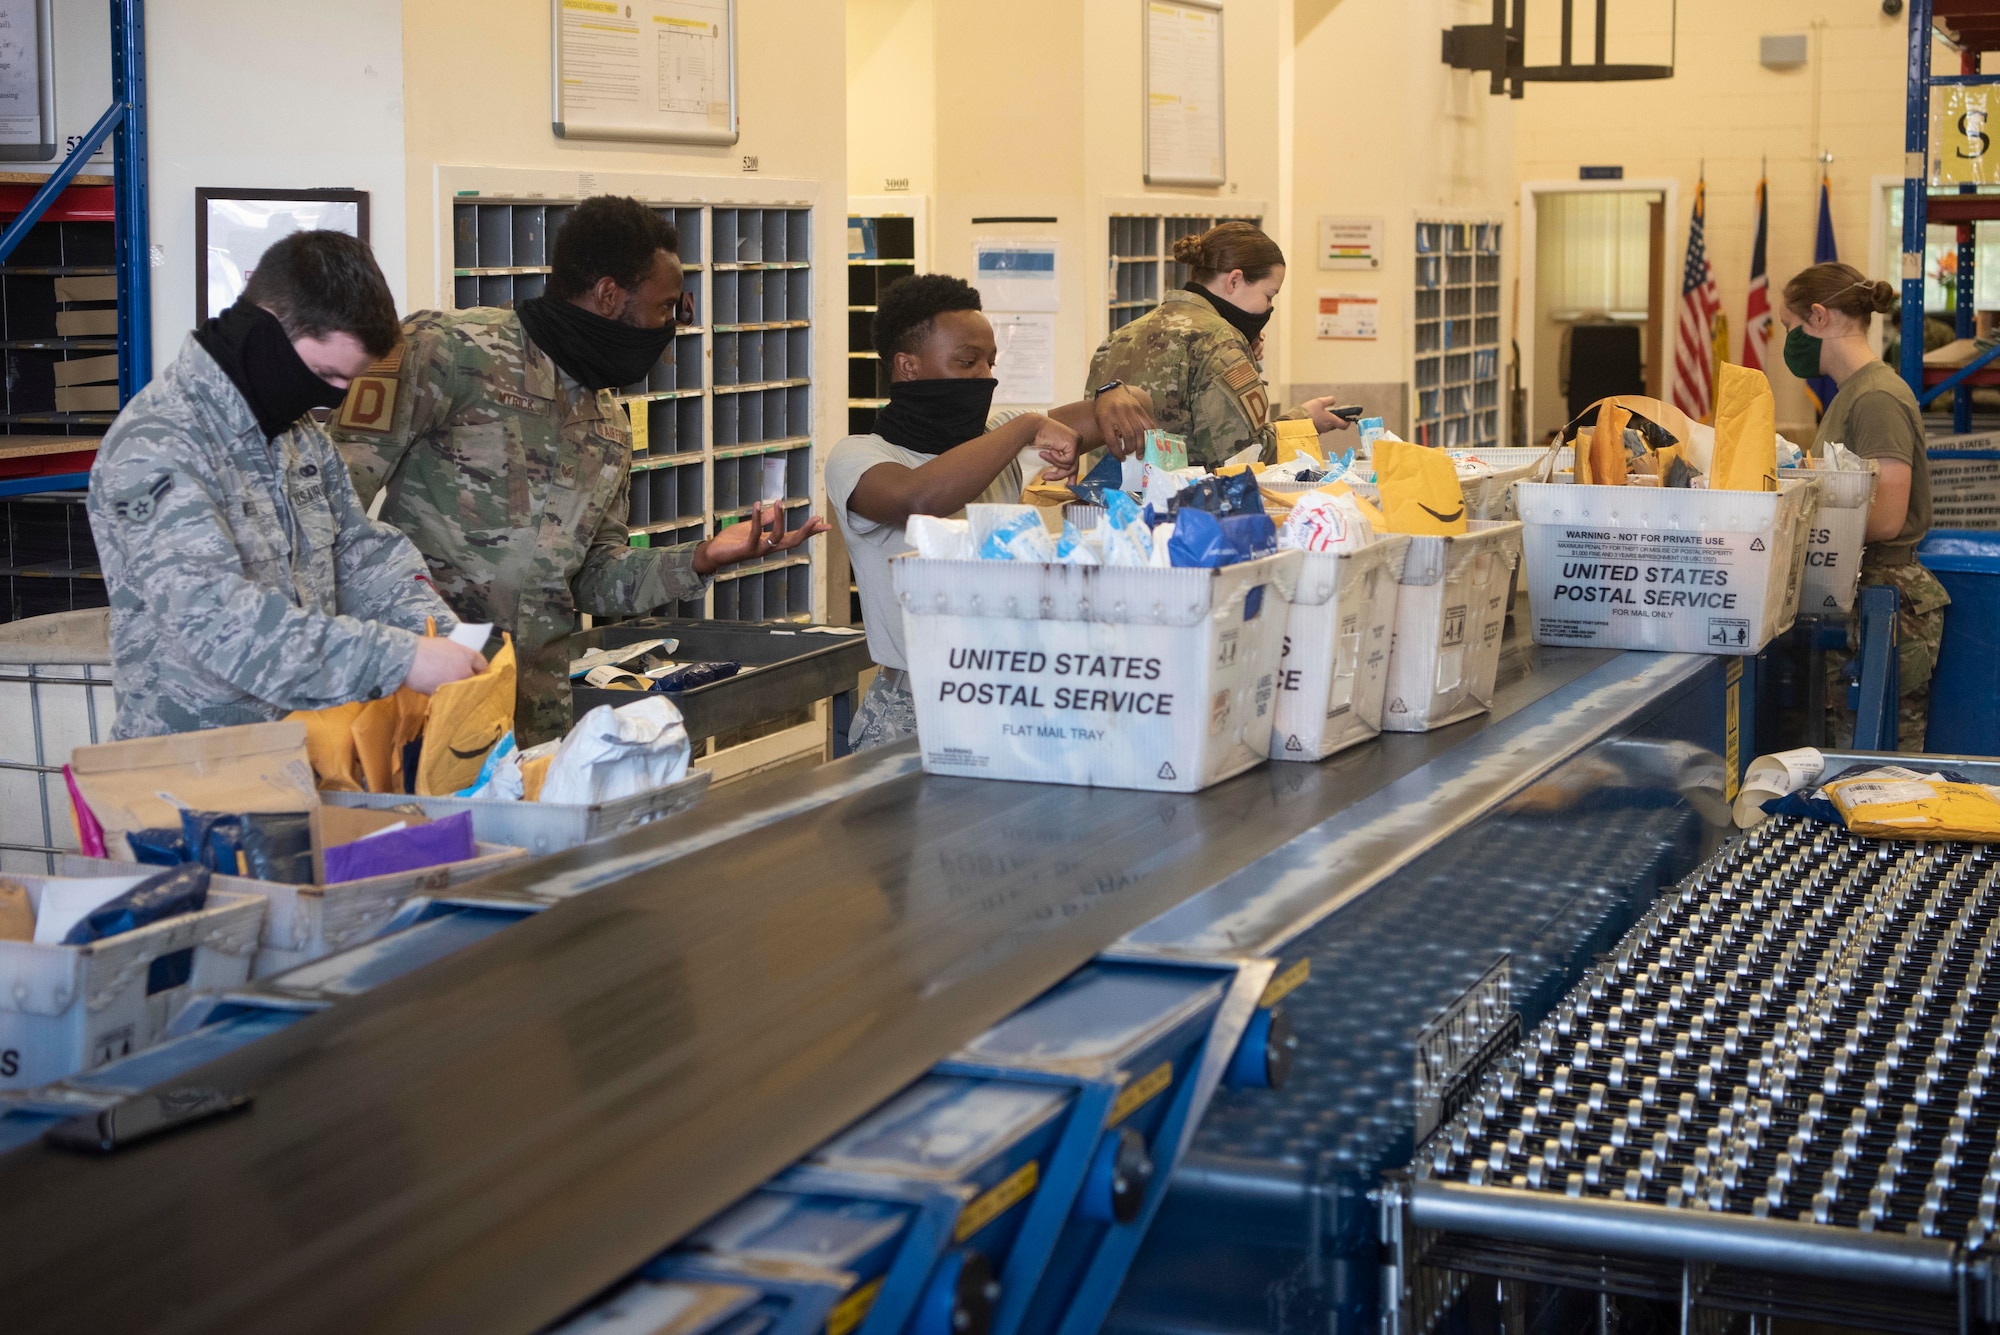 Postal clerk Airmen inventory packages at the post office at RAF Mildenhall, England, May 19, 2020. Newly arrived packages are in-processed to ensure accountability of mail and alert customers to when their order has arrived. (U.S. Air Force photo by Airman 1st Class Joseph Barron)